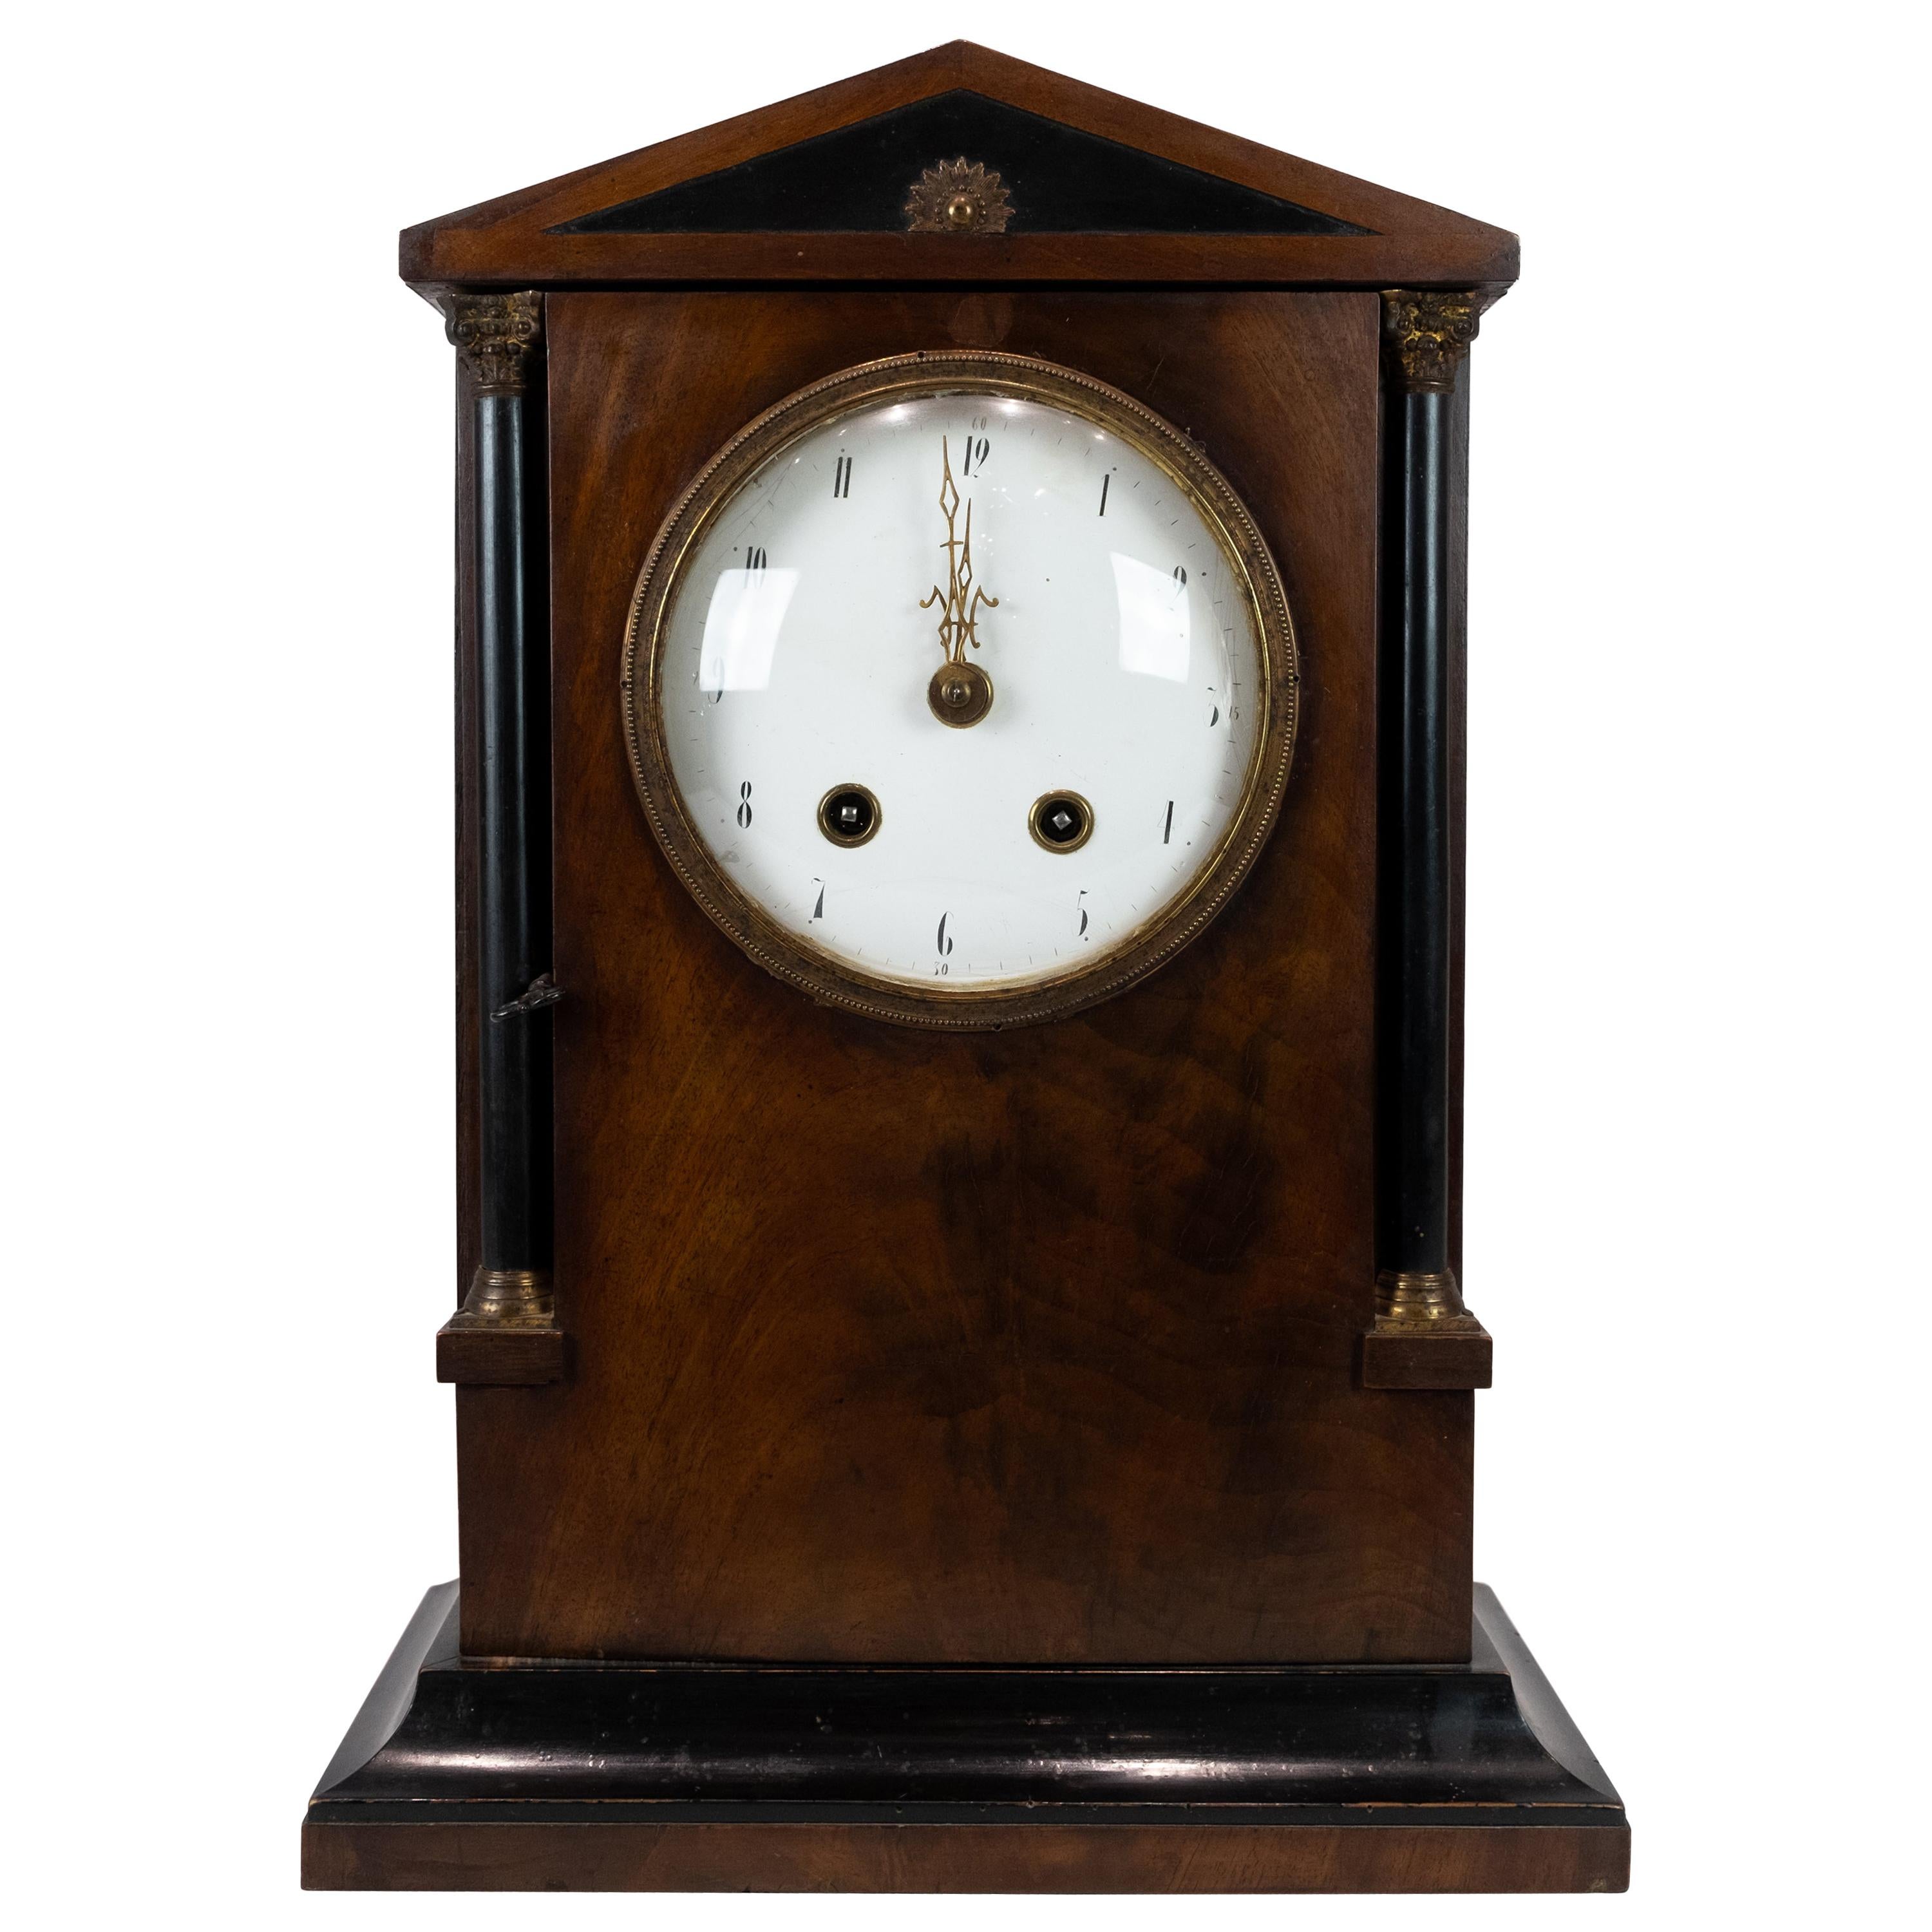 French Fireplace Table Clock in Mahogany from the 1840s